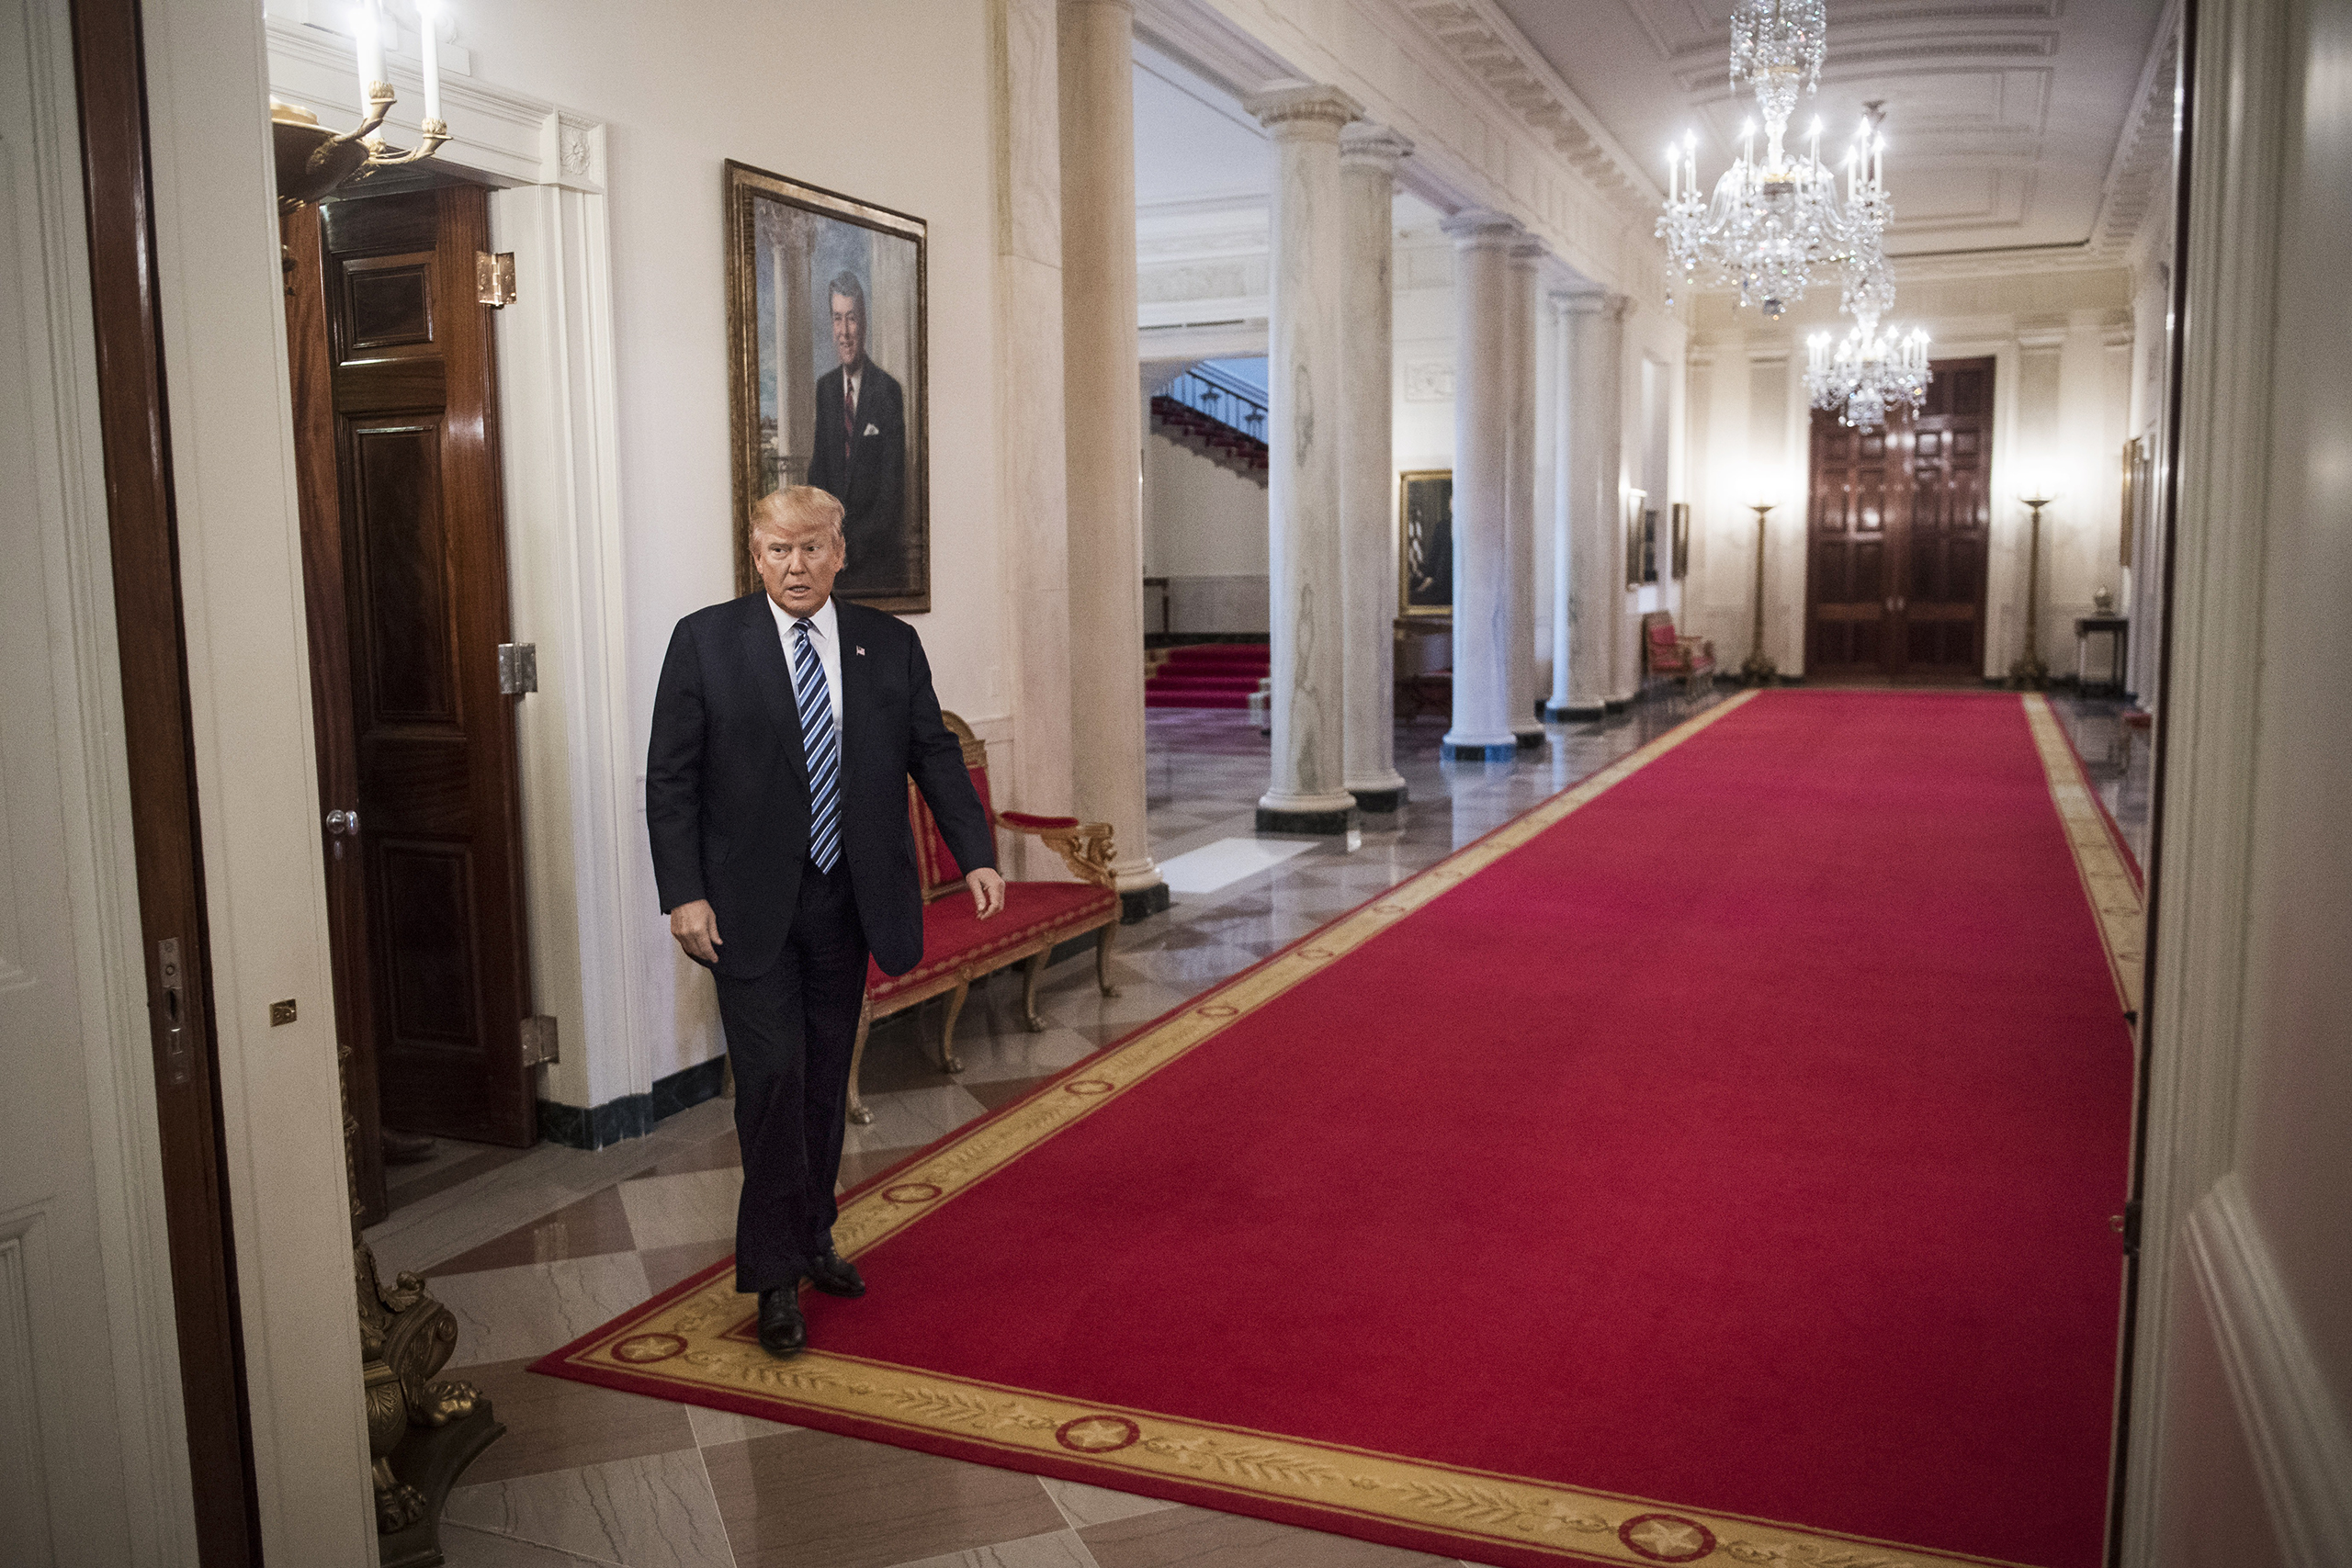 The President walks through the Cross Hall of the White House before a meeting with airline executives on Feb. 9 (Jabin Botsford—The Washington Post/Getty Images)